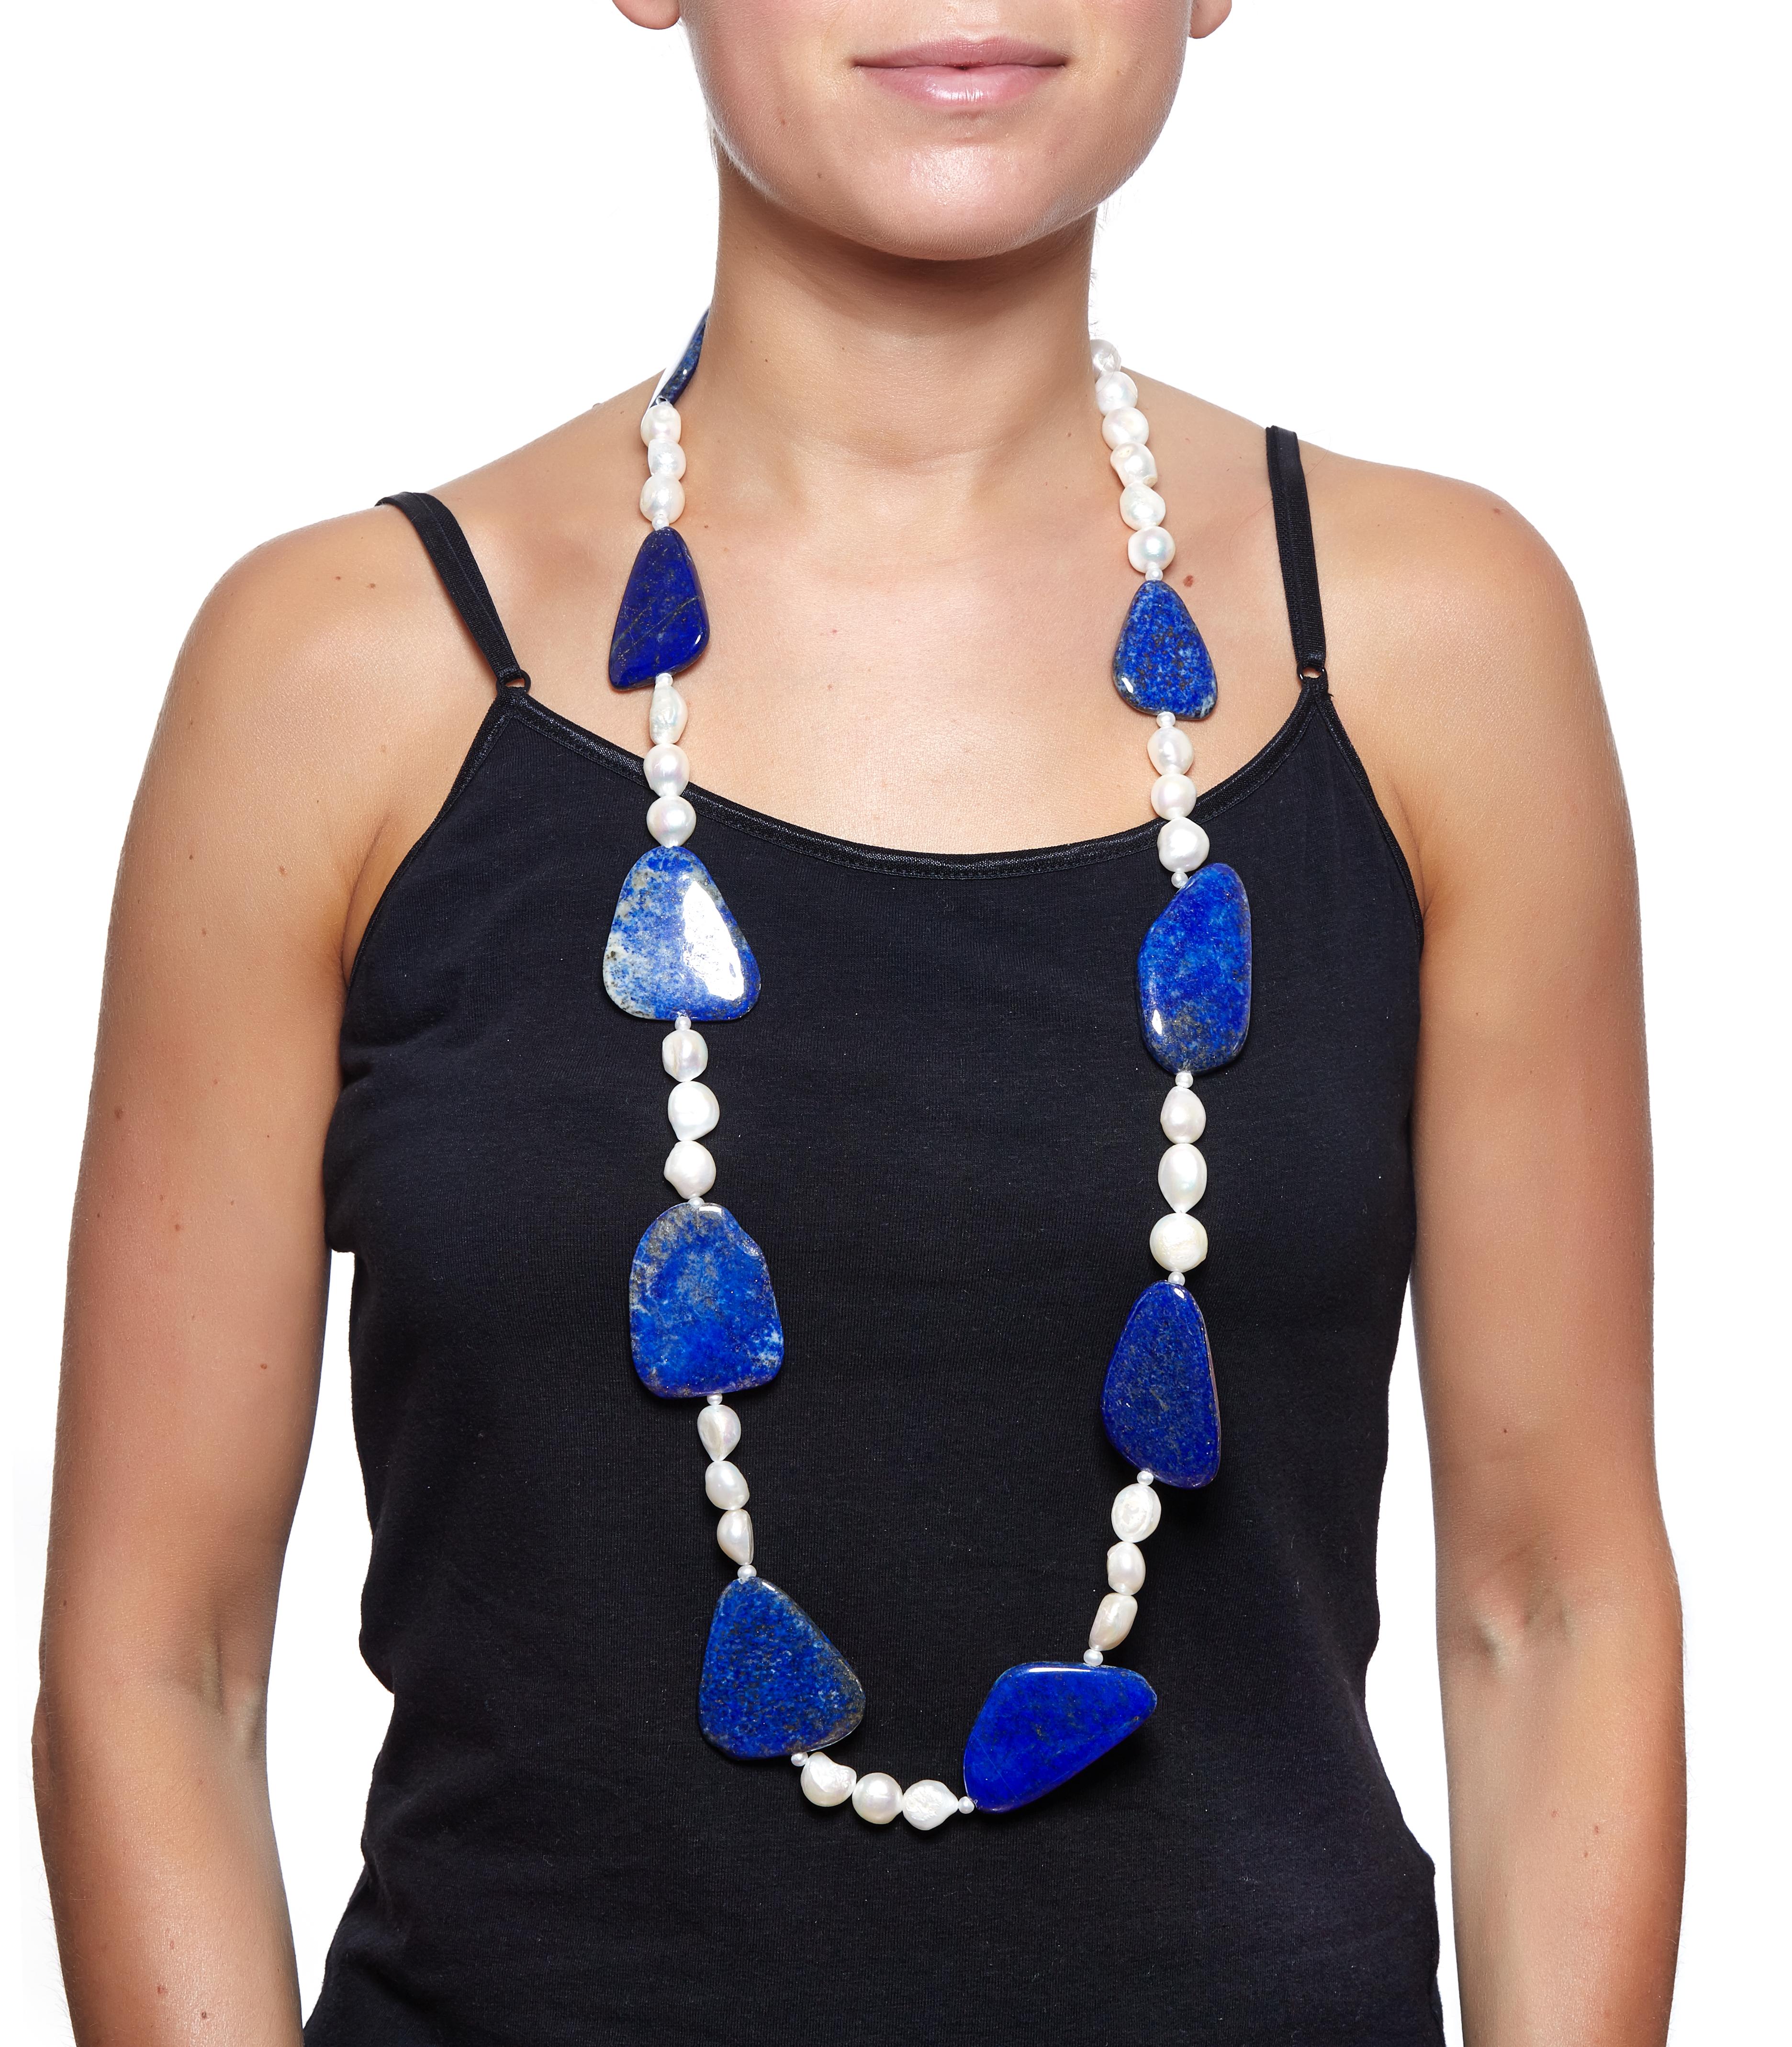 Sabrina Balsky Jewelry
One of a Kind Organic Shaped Untreated Afghani Lapis and Baroque and Seed Pearl Necklace Sterling Clasp.  Beautiful quality Lapis. The deepest blue lapis is mined in Afghanistan.
One of those pieces of Jewelry that makes a